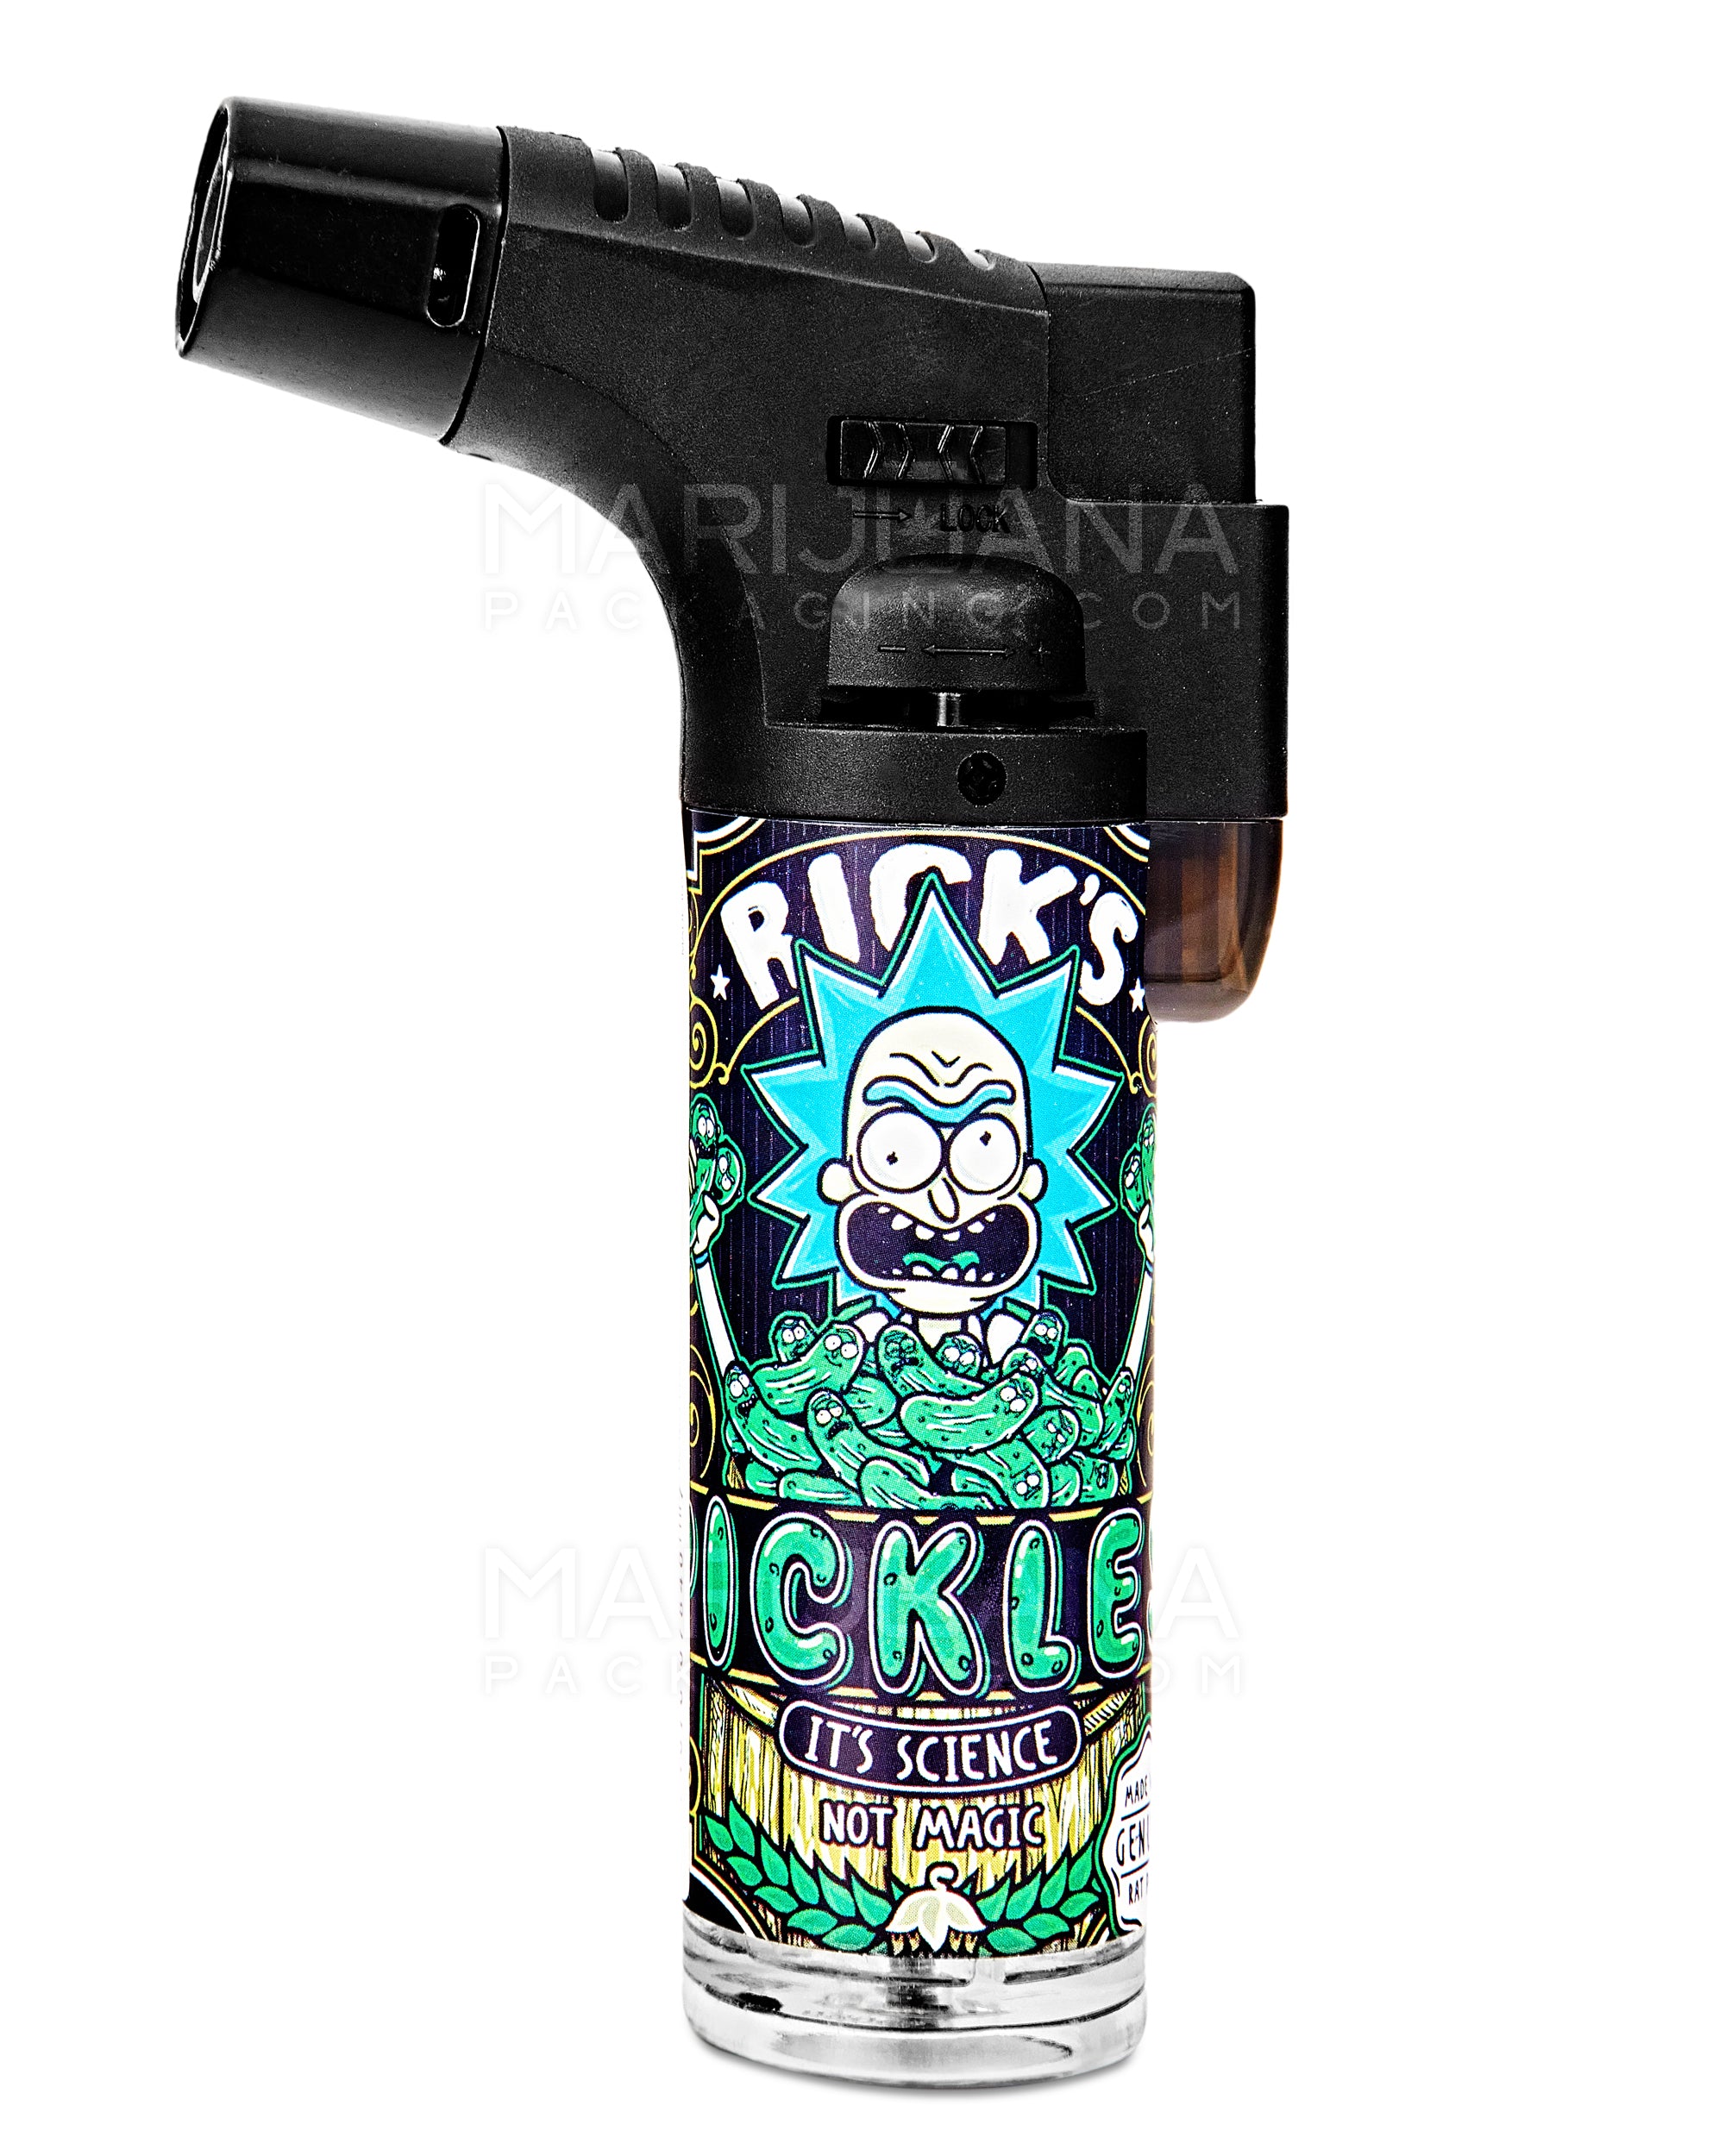 R&M Metal Torch w/ Safety Lock | 4.5in Tall - Butane - Assorted - 9